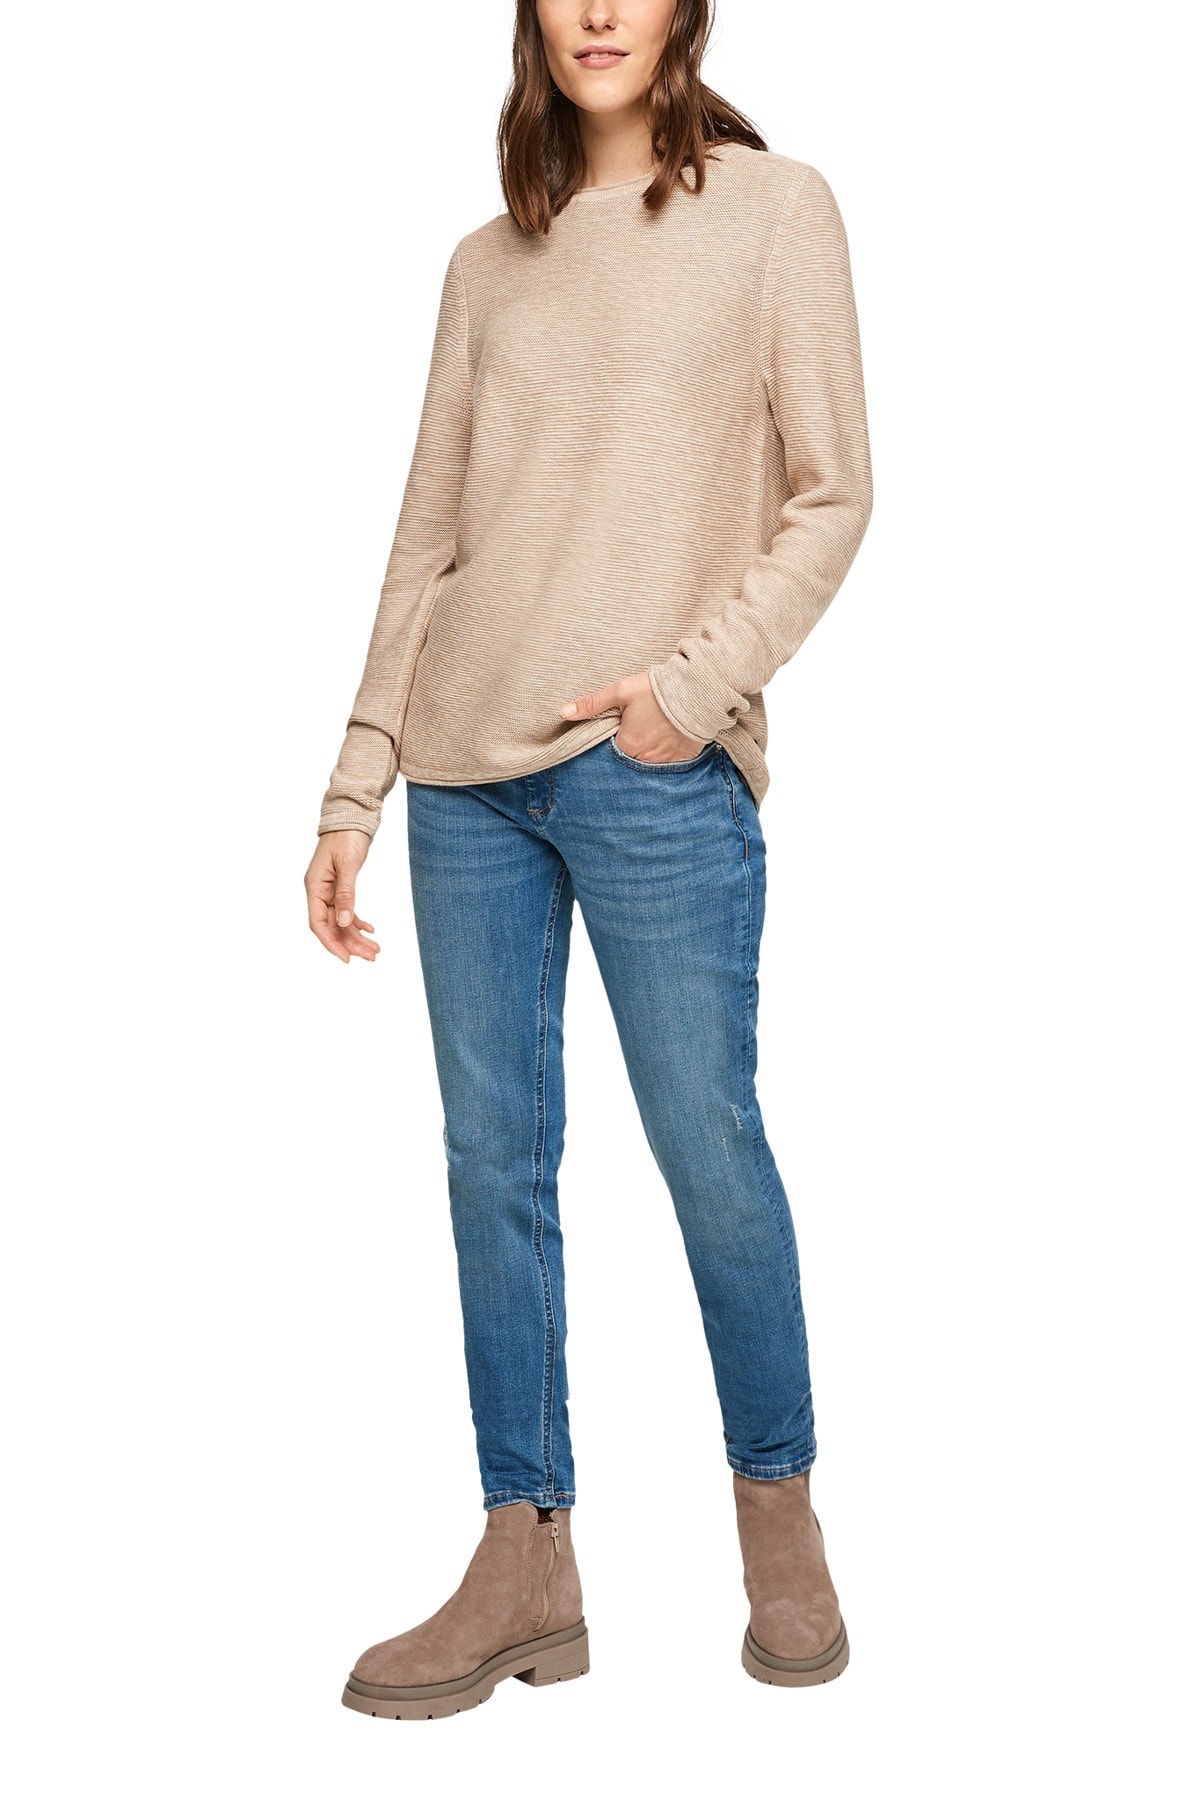 QS by s.Oliver Pullover Braun Regular Fit FN7154